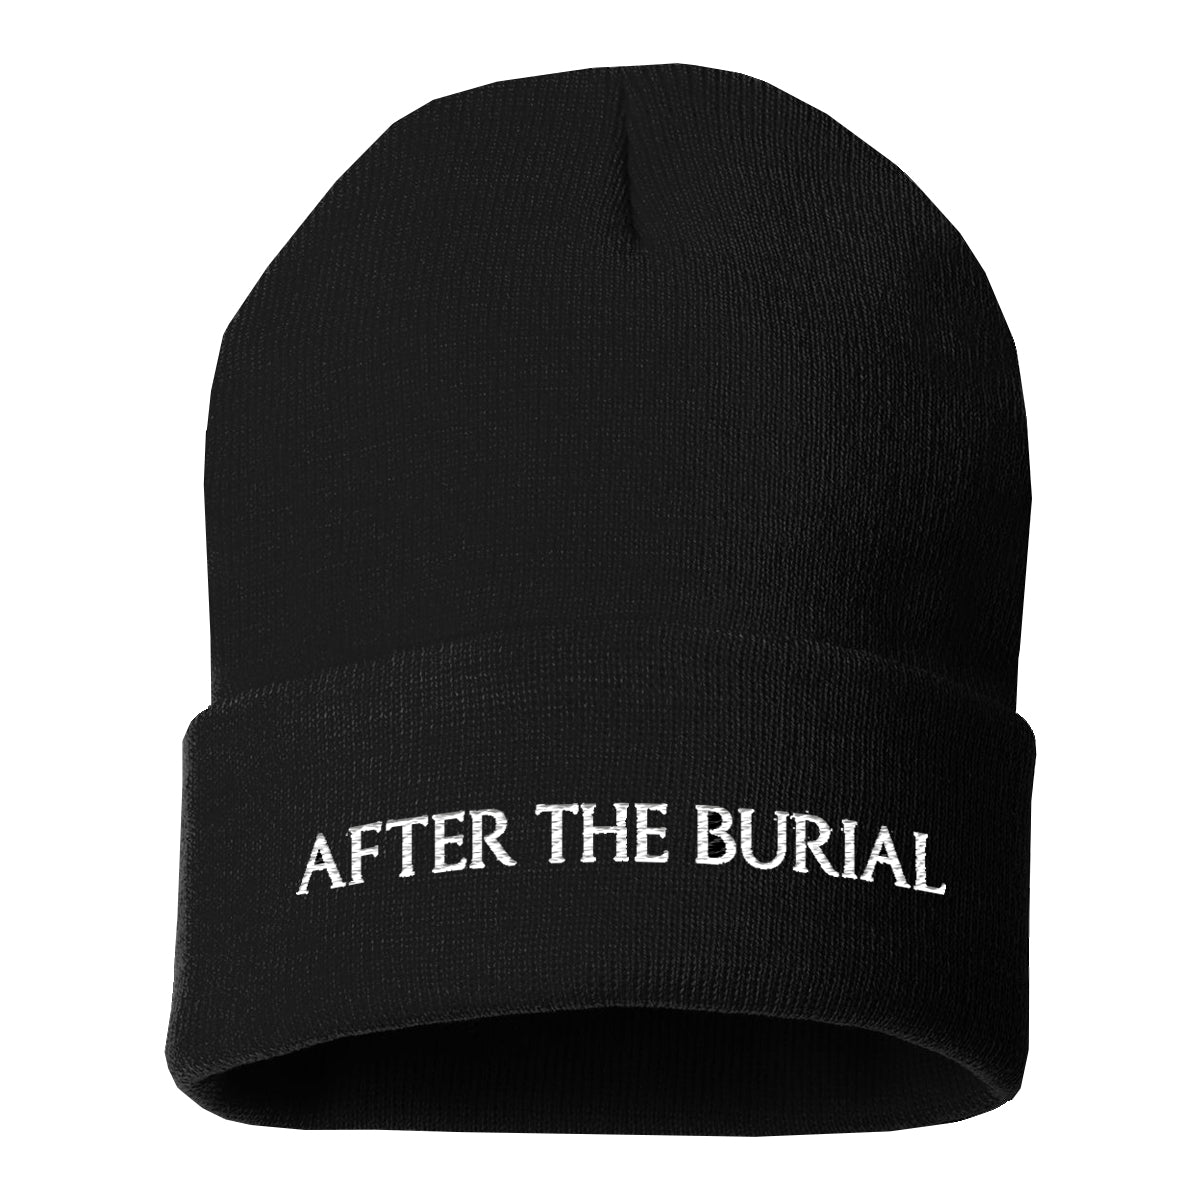 After The Burial - Black Beanie